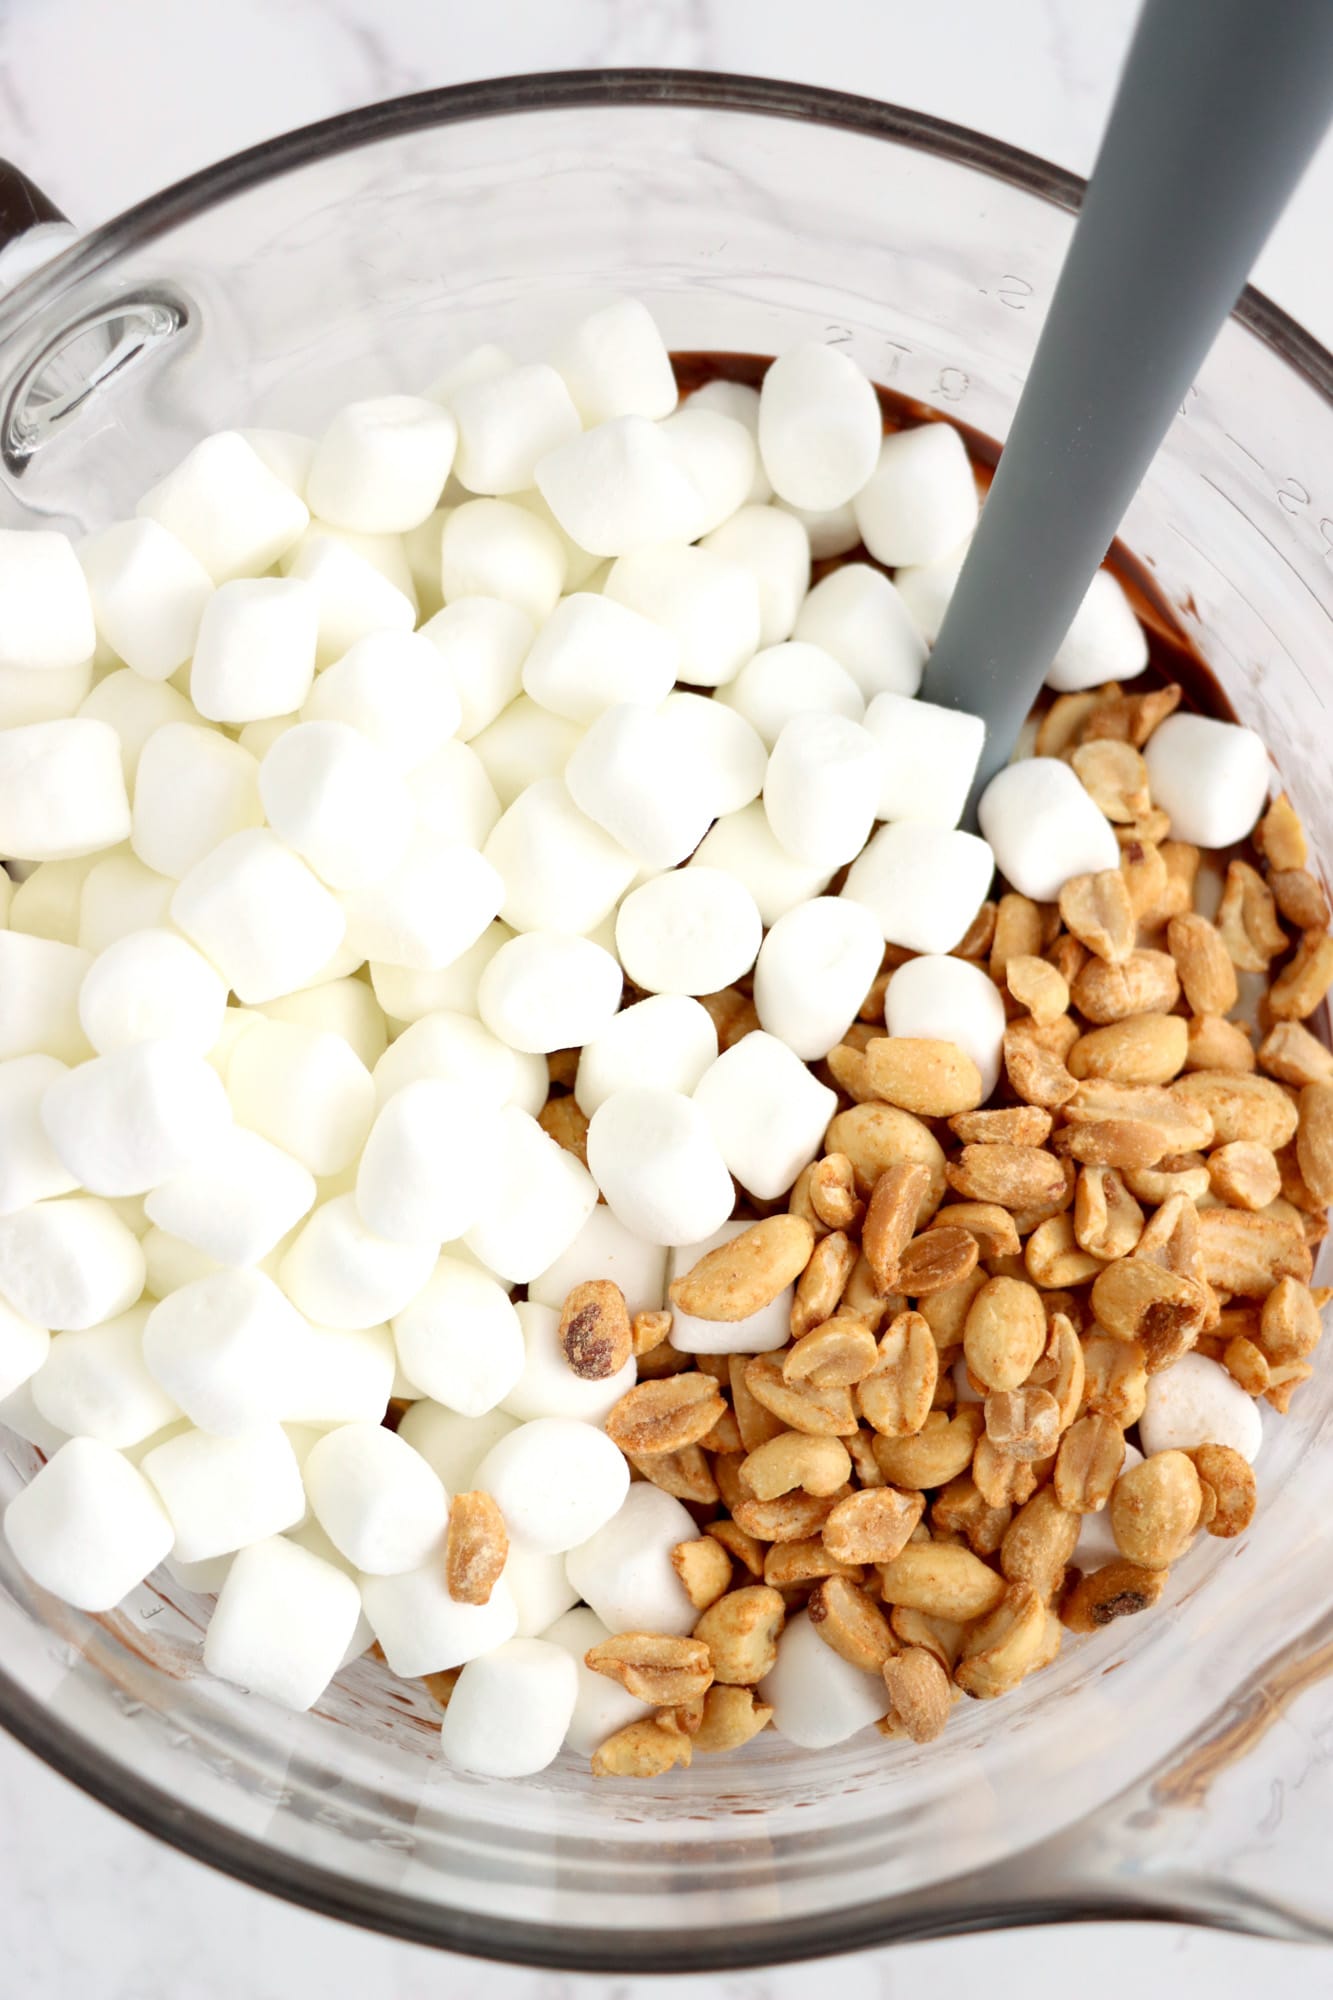 Marshmallows and roasted peanuts in a glass bowl with a spatula